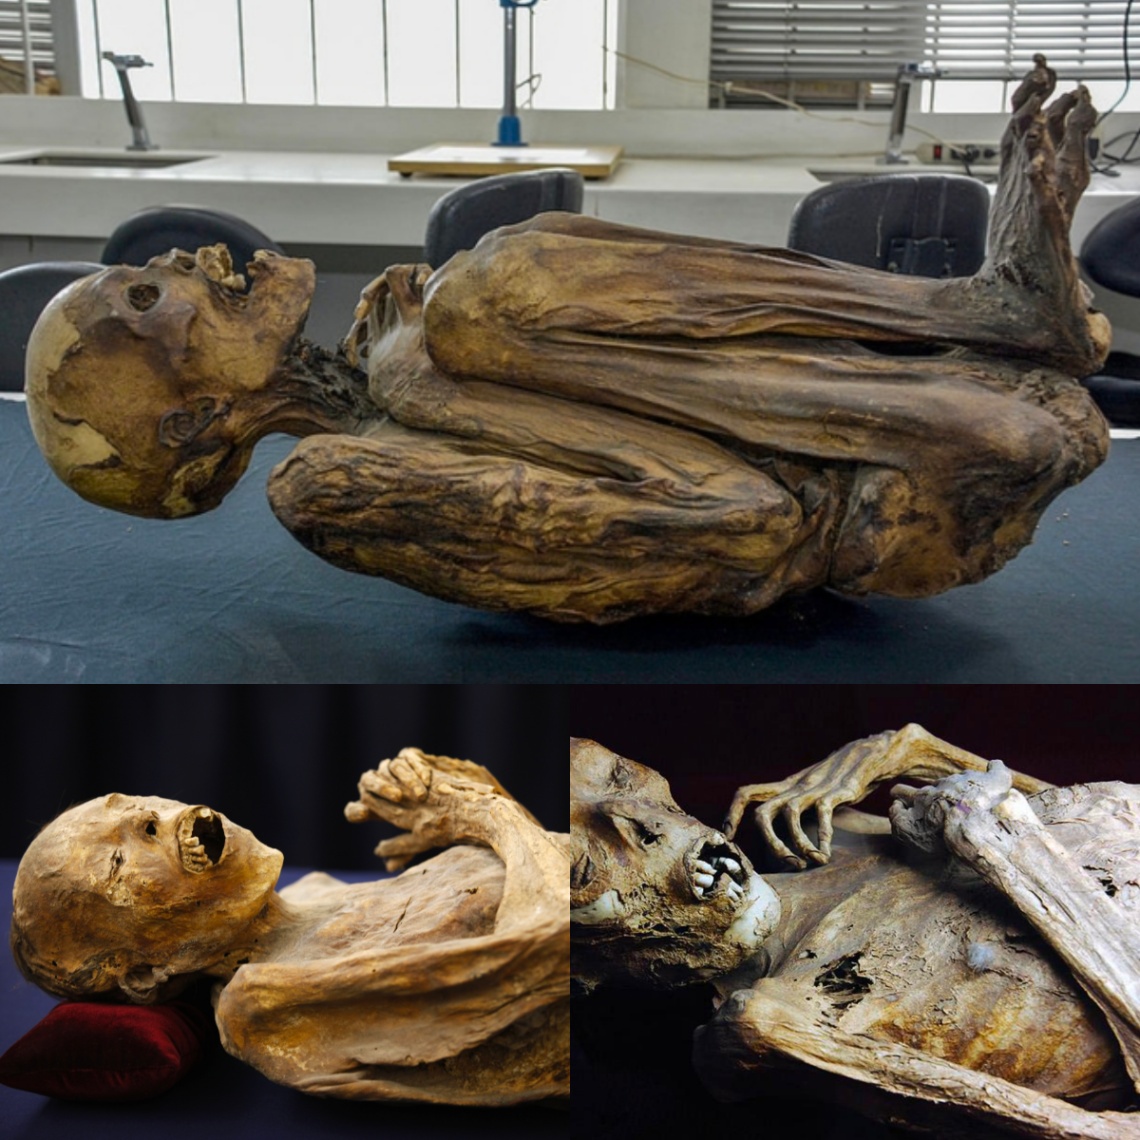 The Enigma of San Bernardo’s ‘Natural Mummies’: Over a Dozen Exceptionally Well-Preserved Bodies Puzzle Experts, Defying Explanation – Latest News